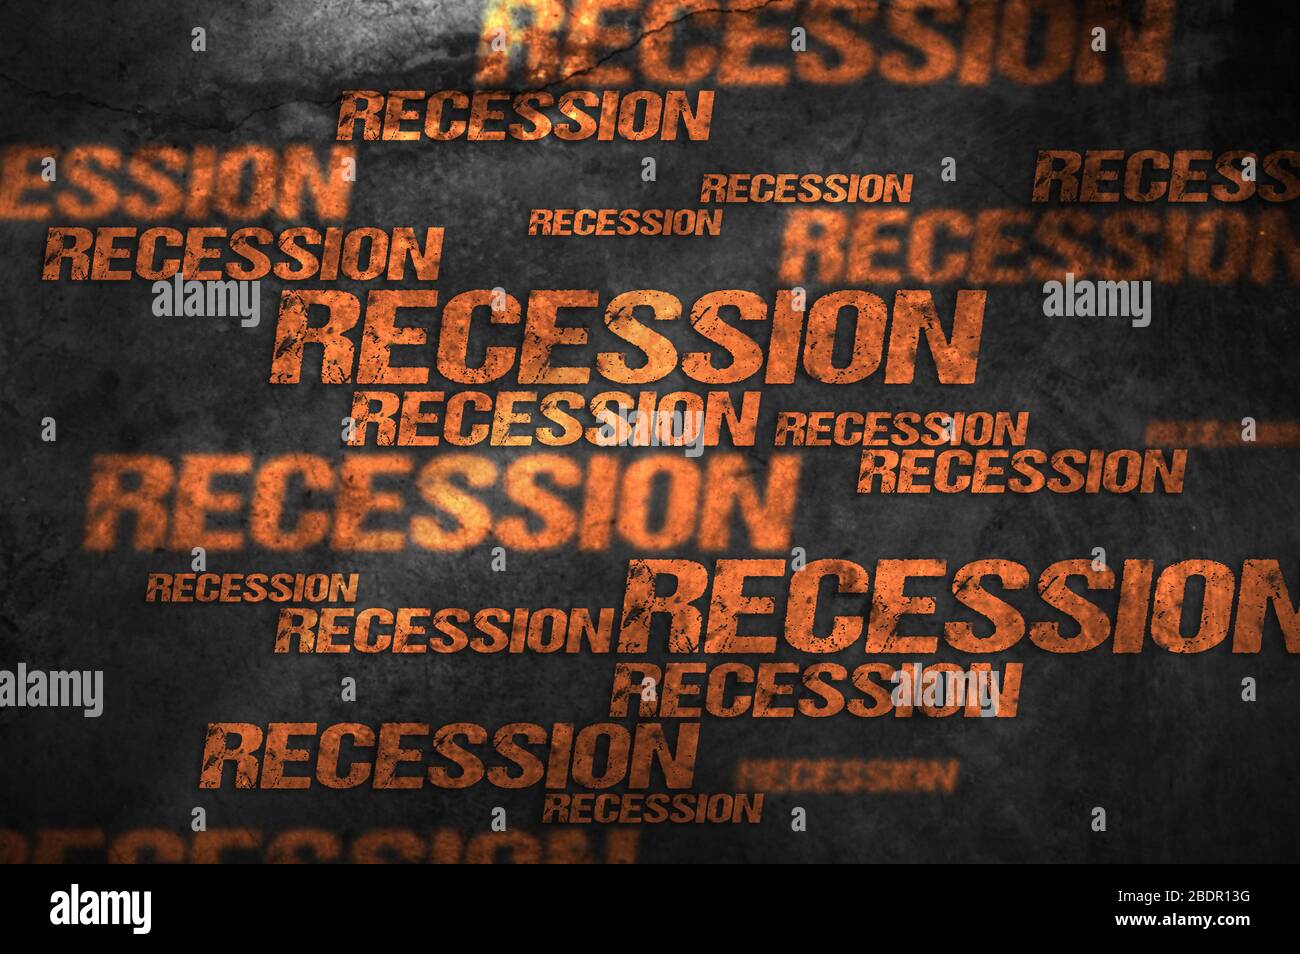 'Recession' inscription on black background. Conception of recession in business. Stock Photo